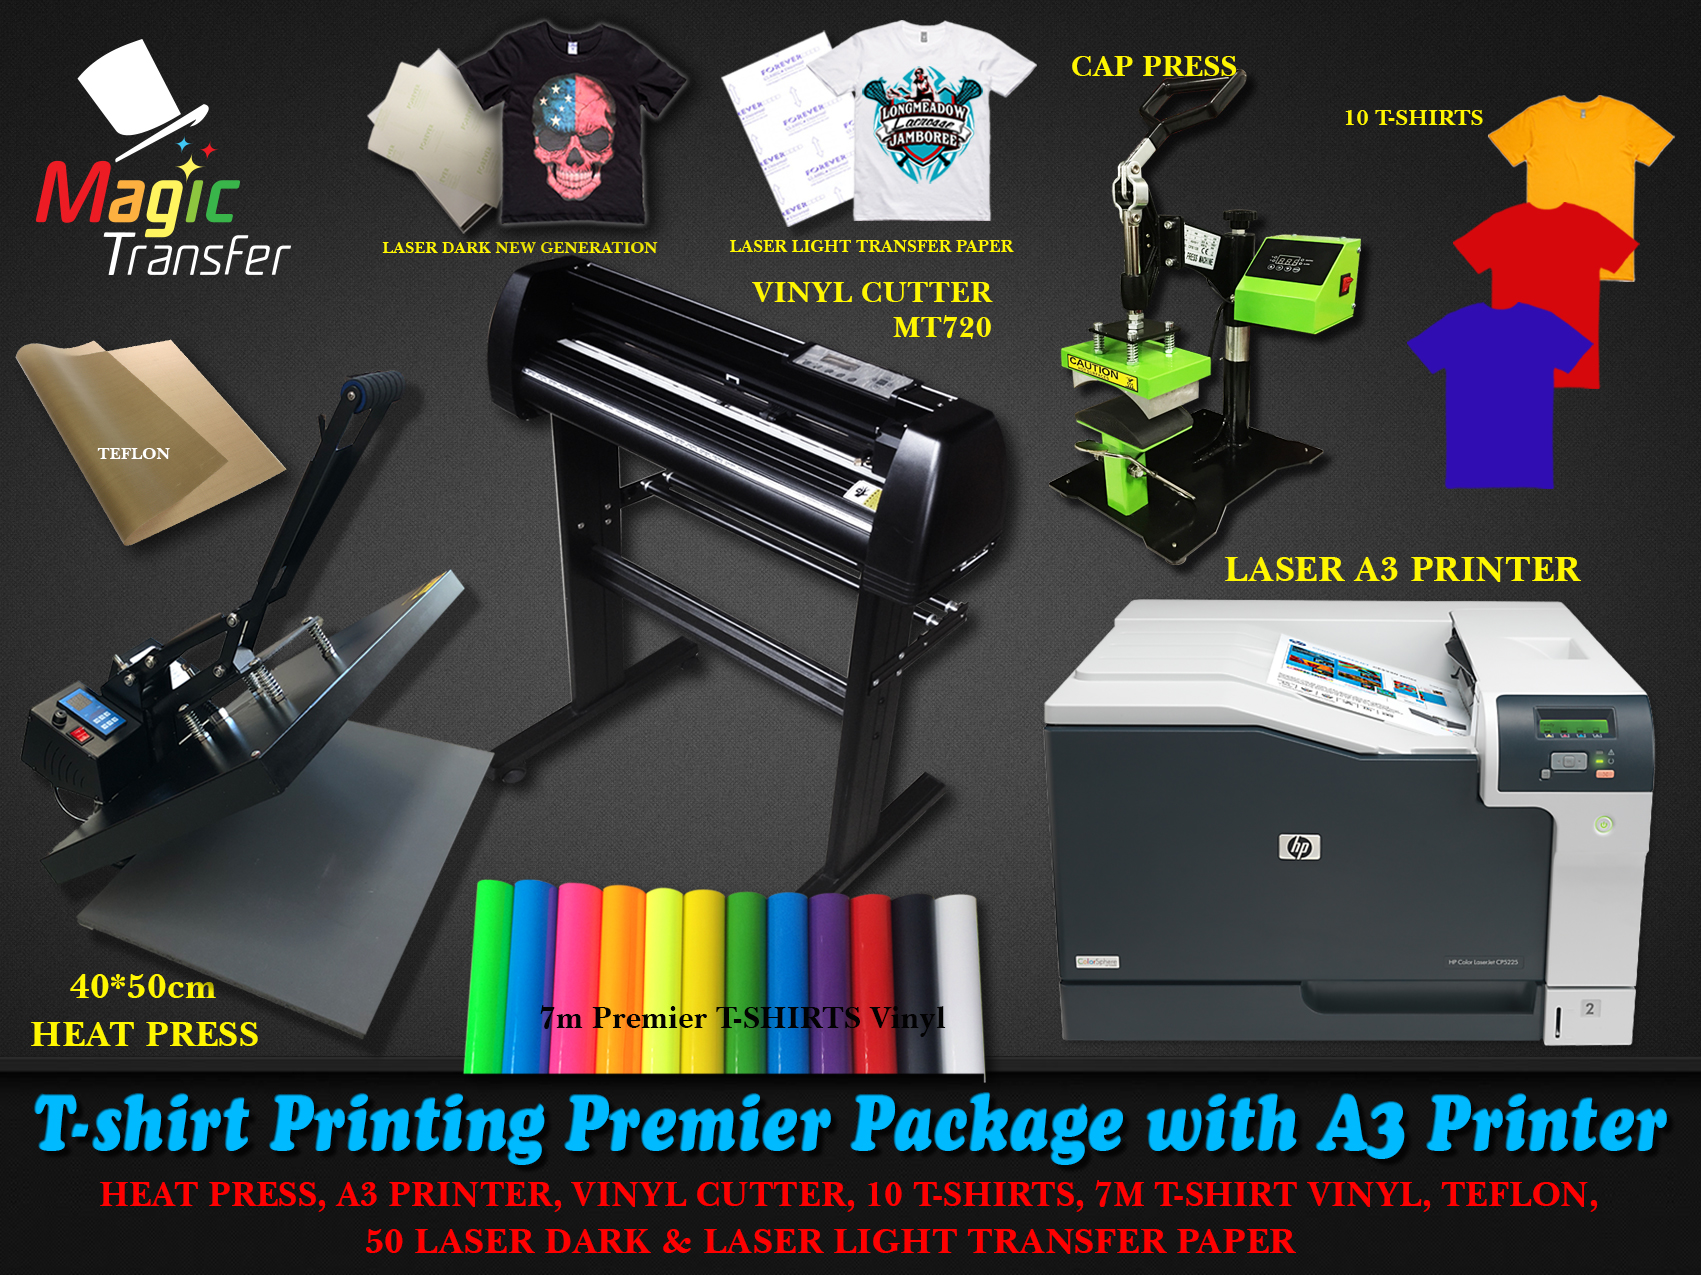 Prædike varme Mekaniker Complete t-shirt printing package with cap press, big format heat press and  Commercial A3 laser printer - Magic Transfer